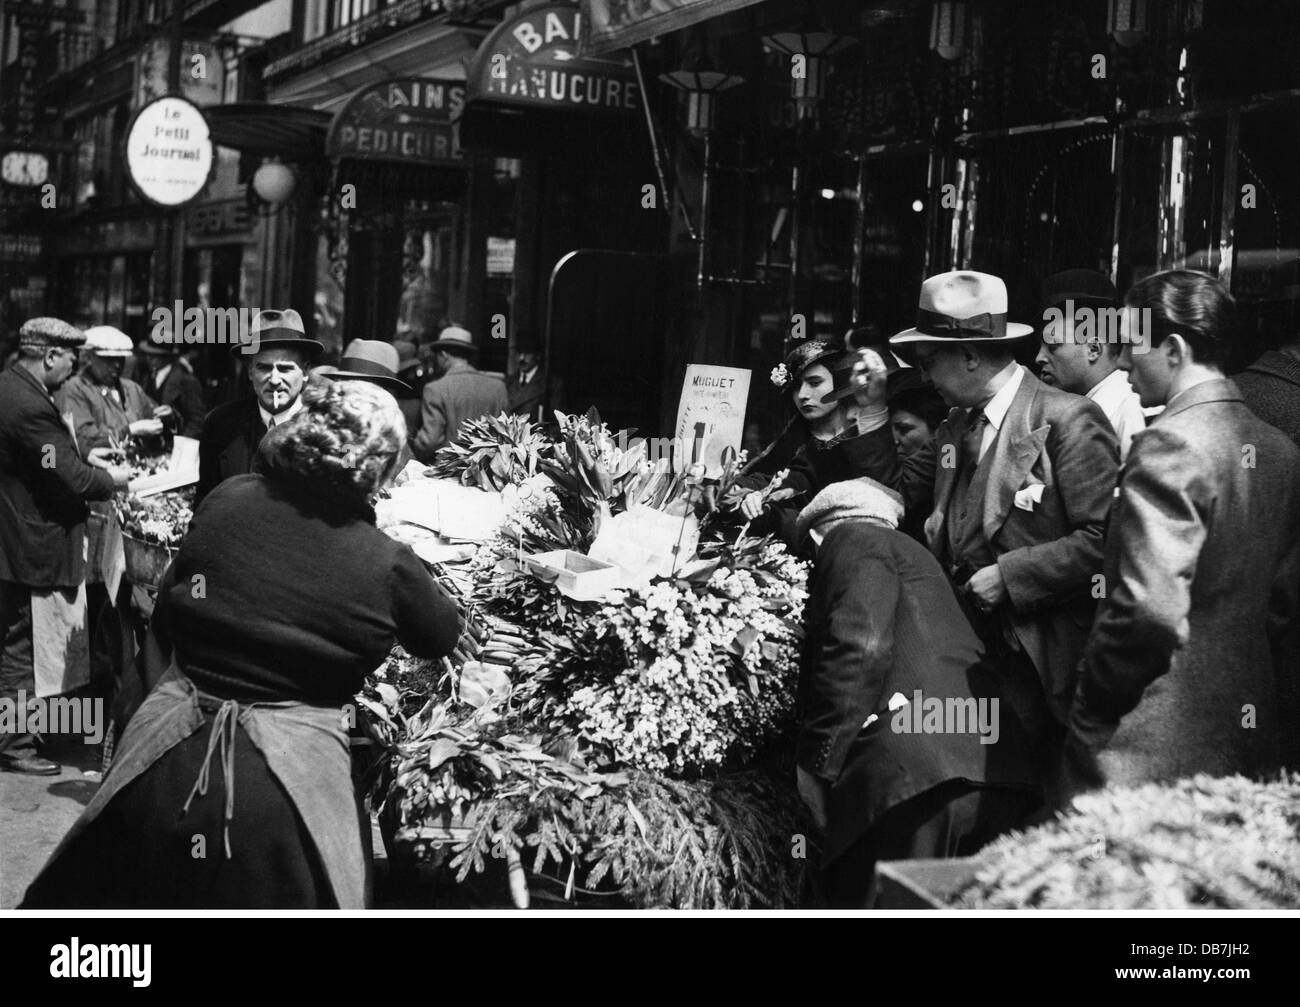 trade, merchants, flower vendor selling lilies of the valley, Paris, 1930s, Additional-Rights-Clearences-Not Available Stock Photo